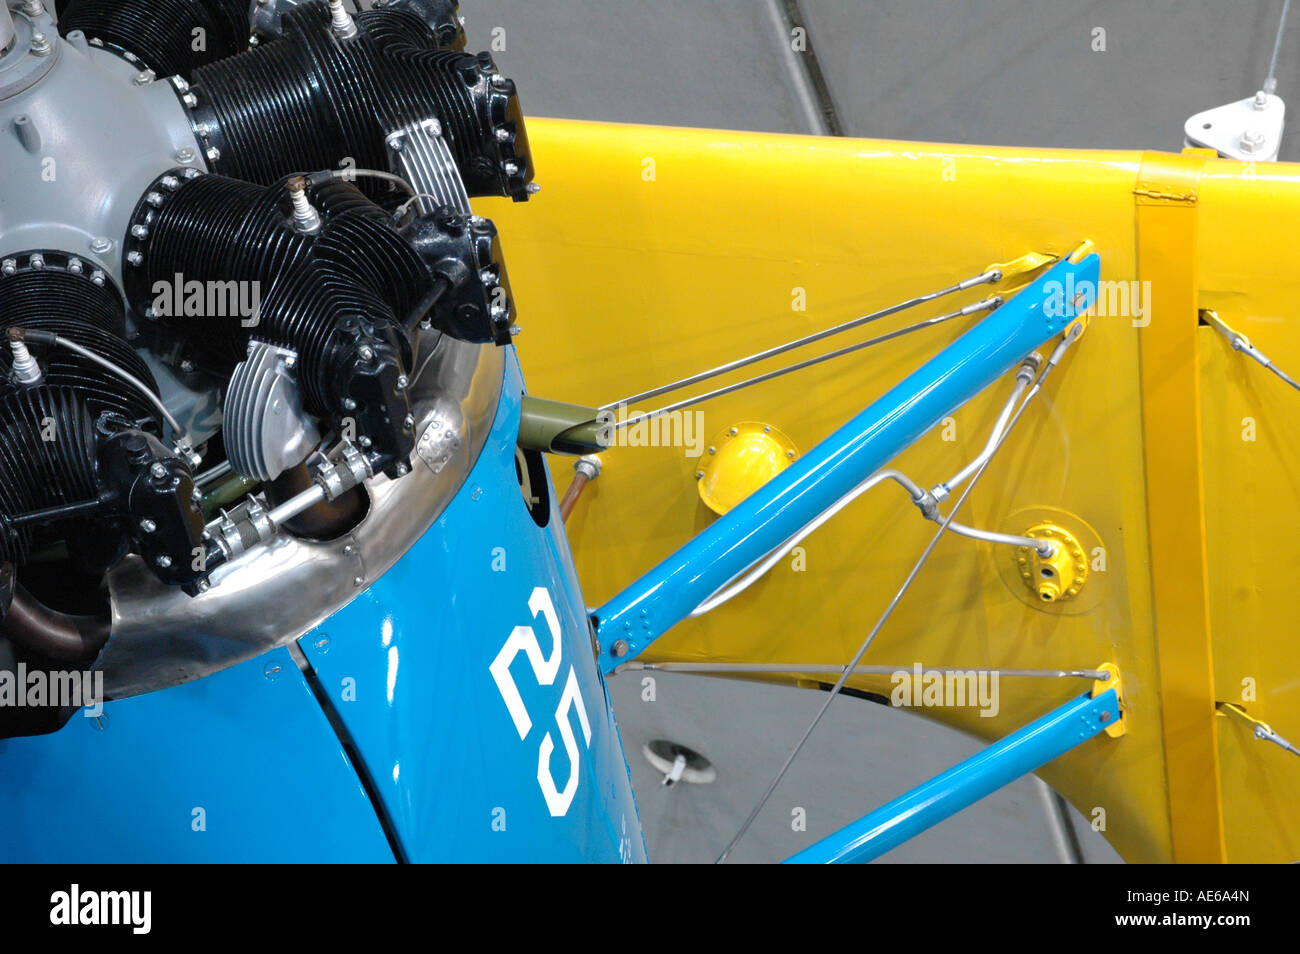 Biplane in an air museum Stock Photo